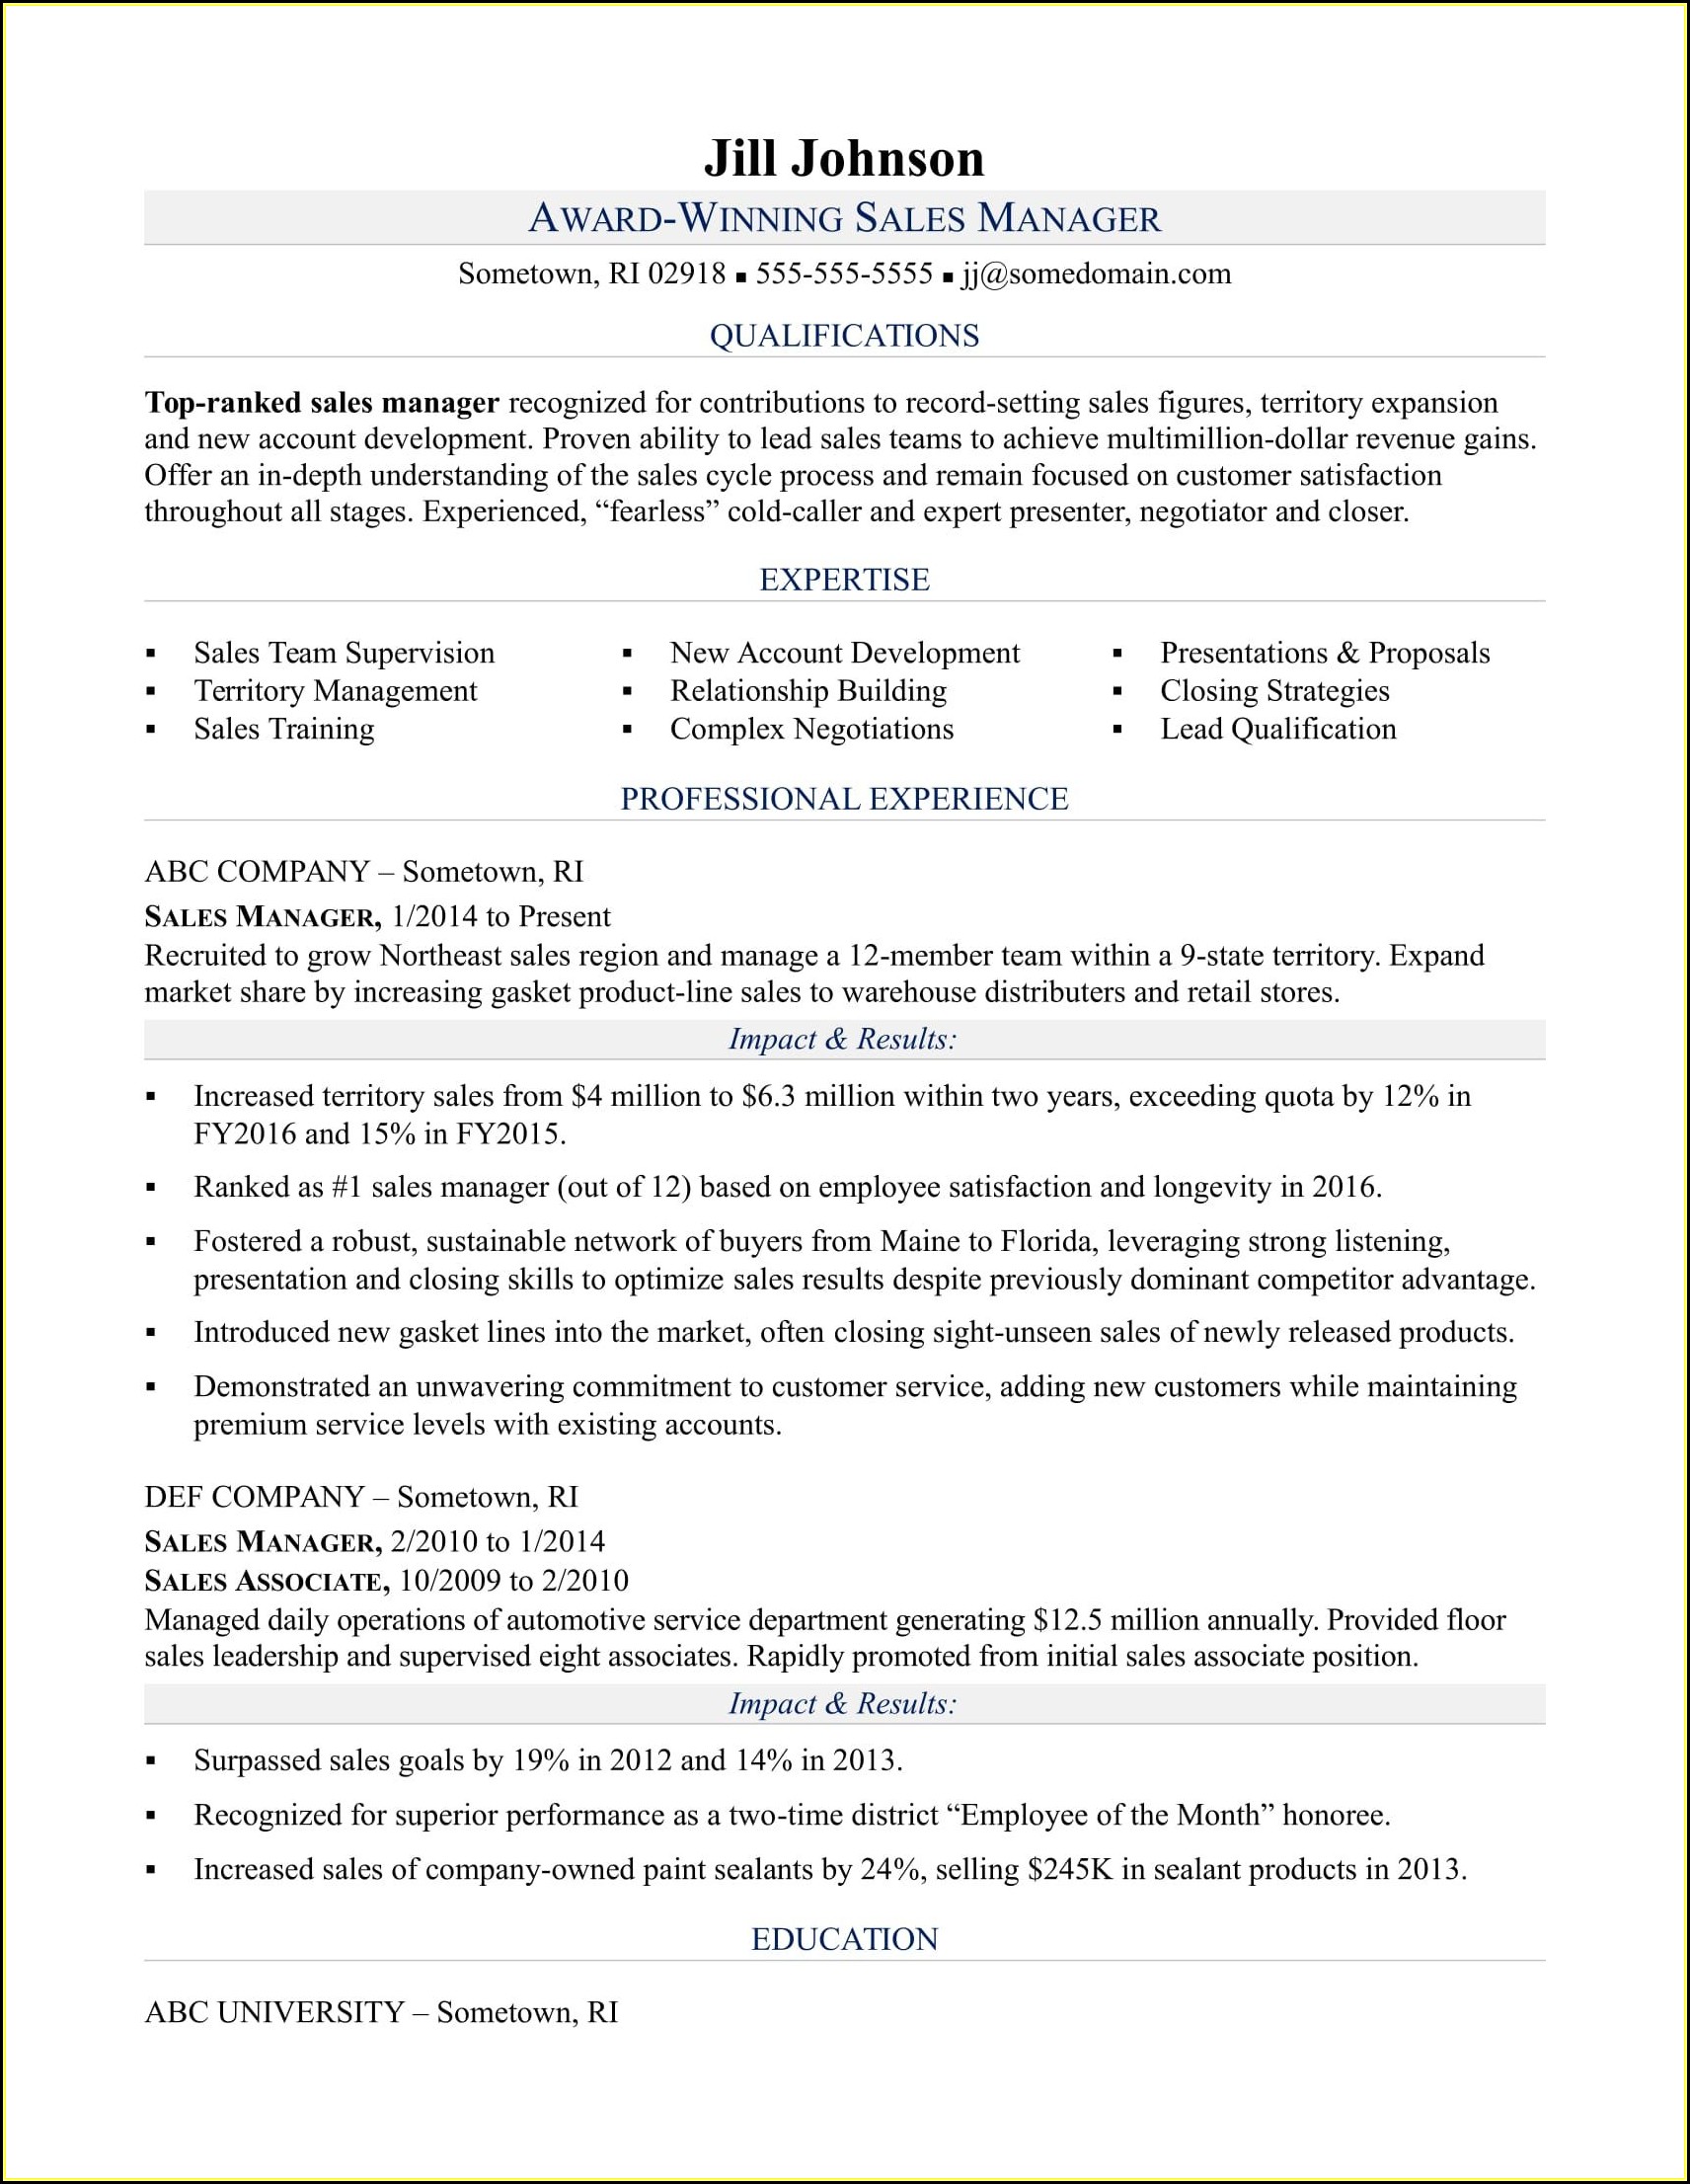 Sample Resume For Sales Manager